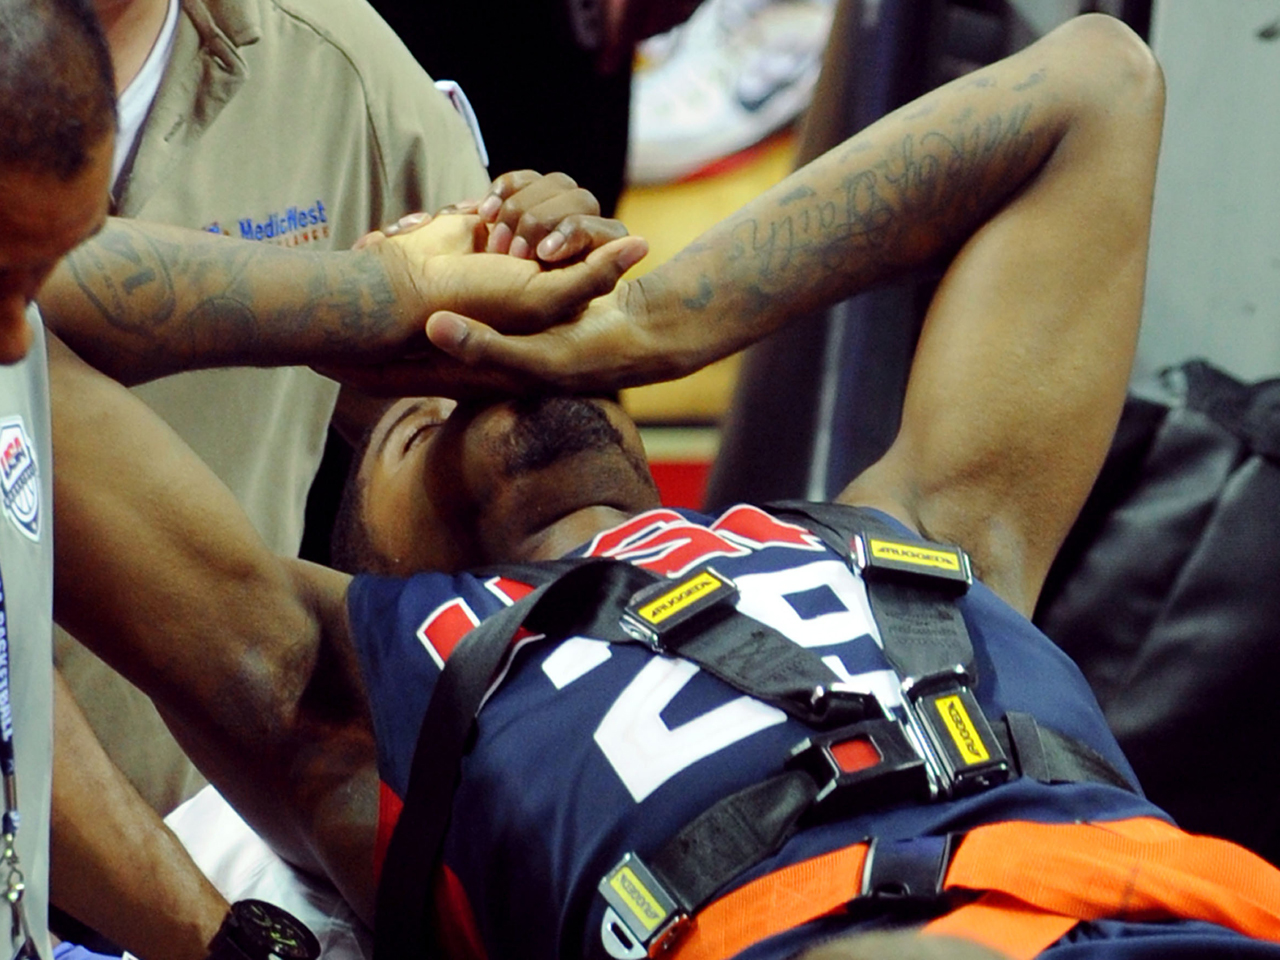 Paul George, before and after the injury